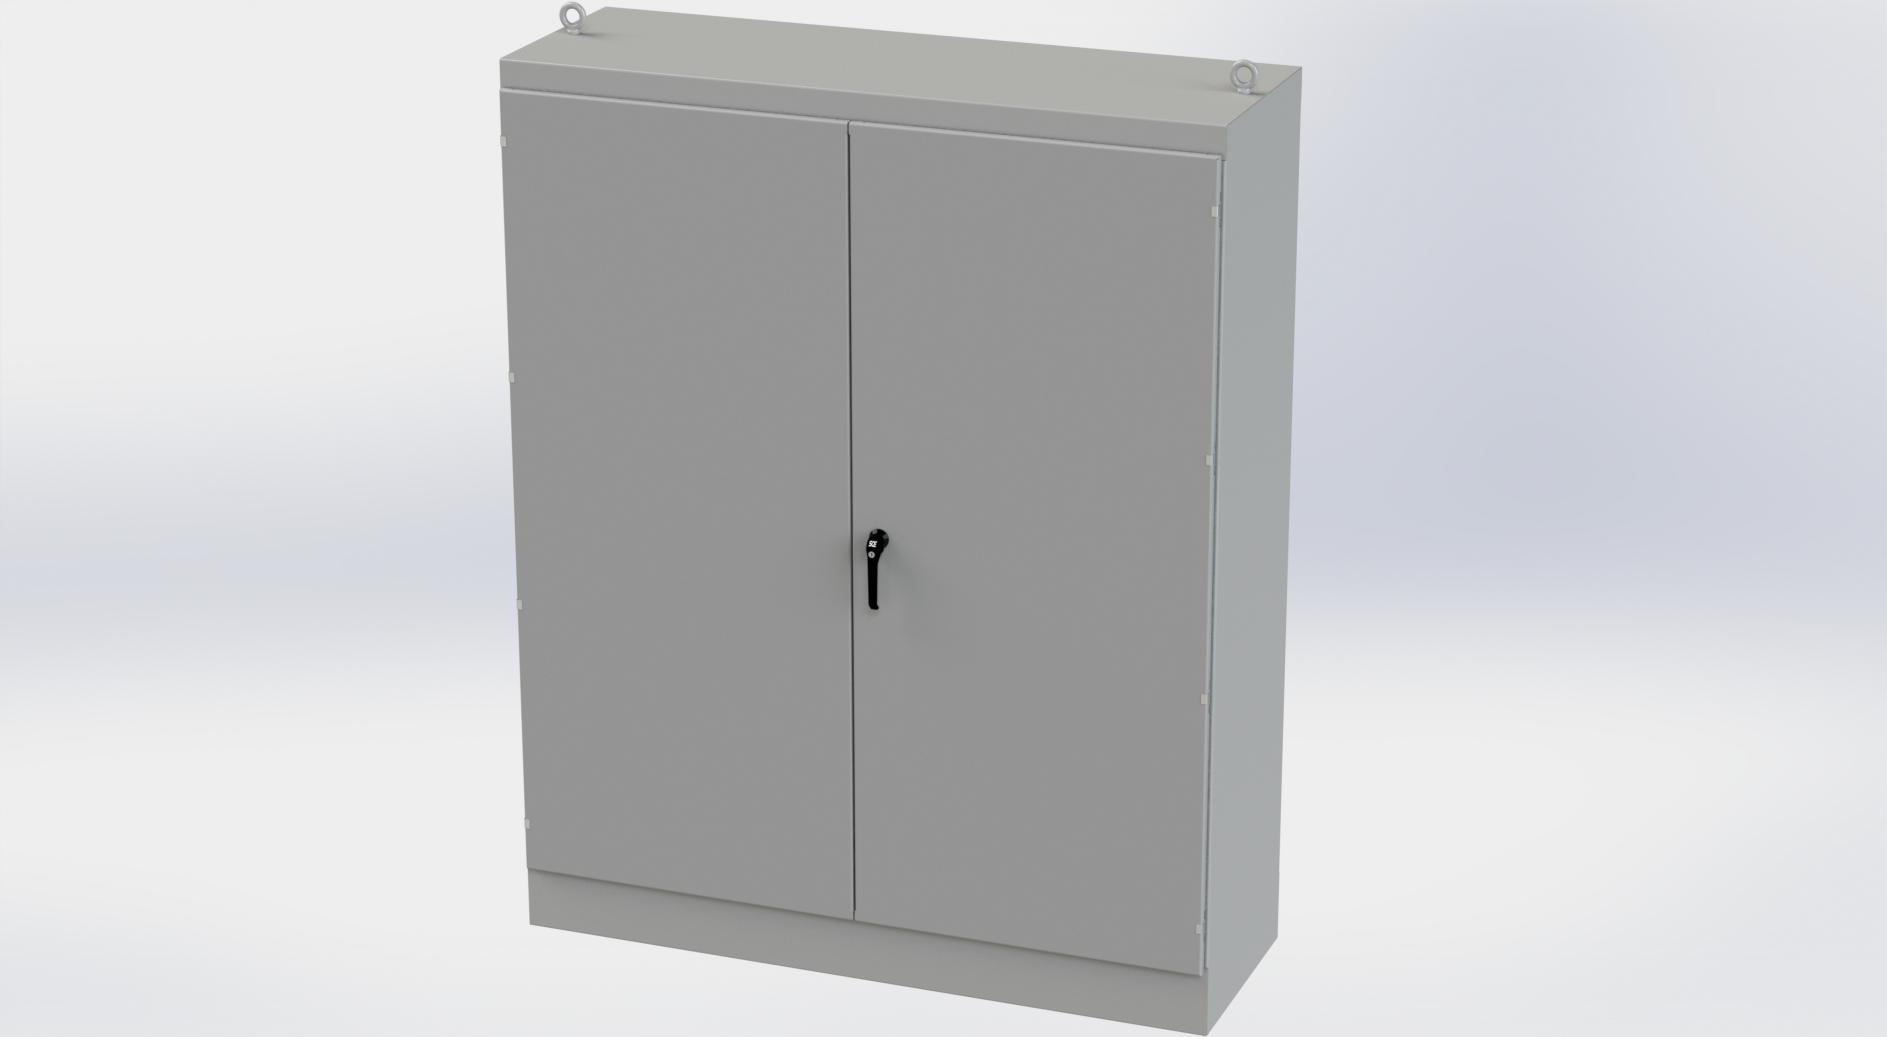 Saginaw Control SCE-907224FSDAD FSDAD Enclosure, Height:90.00", Width:72.00", Depth:24.00", ANSI-61 gray finish inside and out. Optional sub-panels are powder coated white.